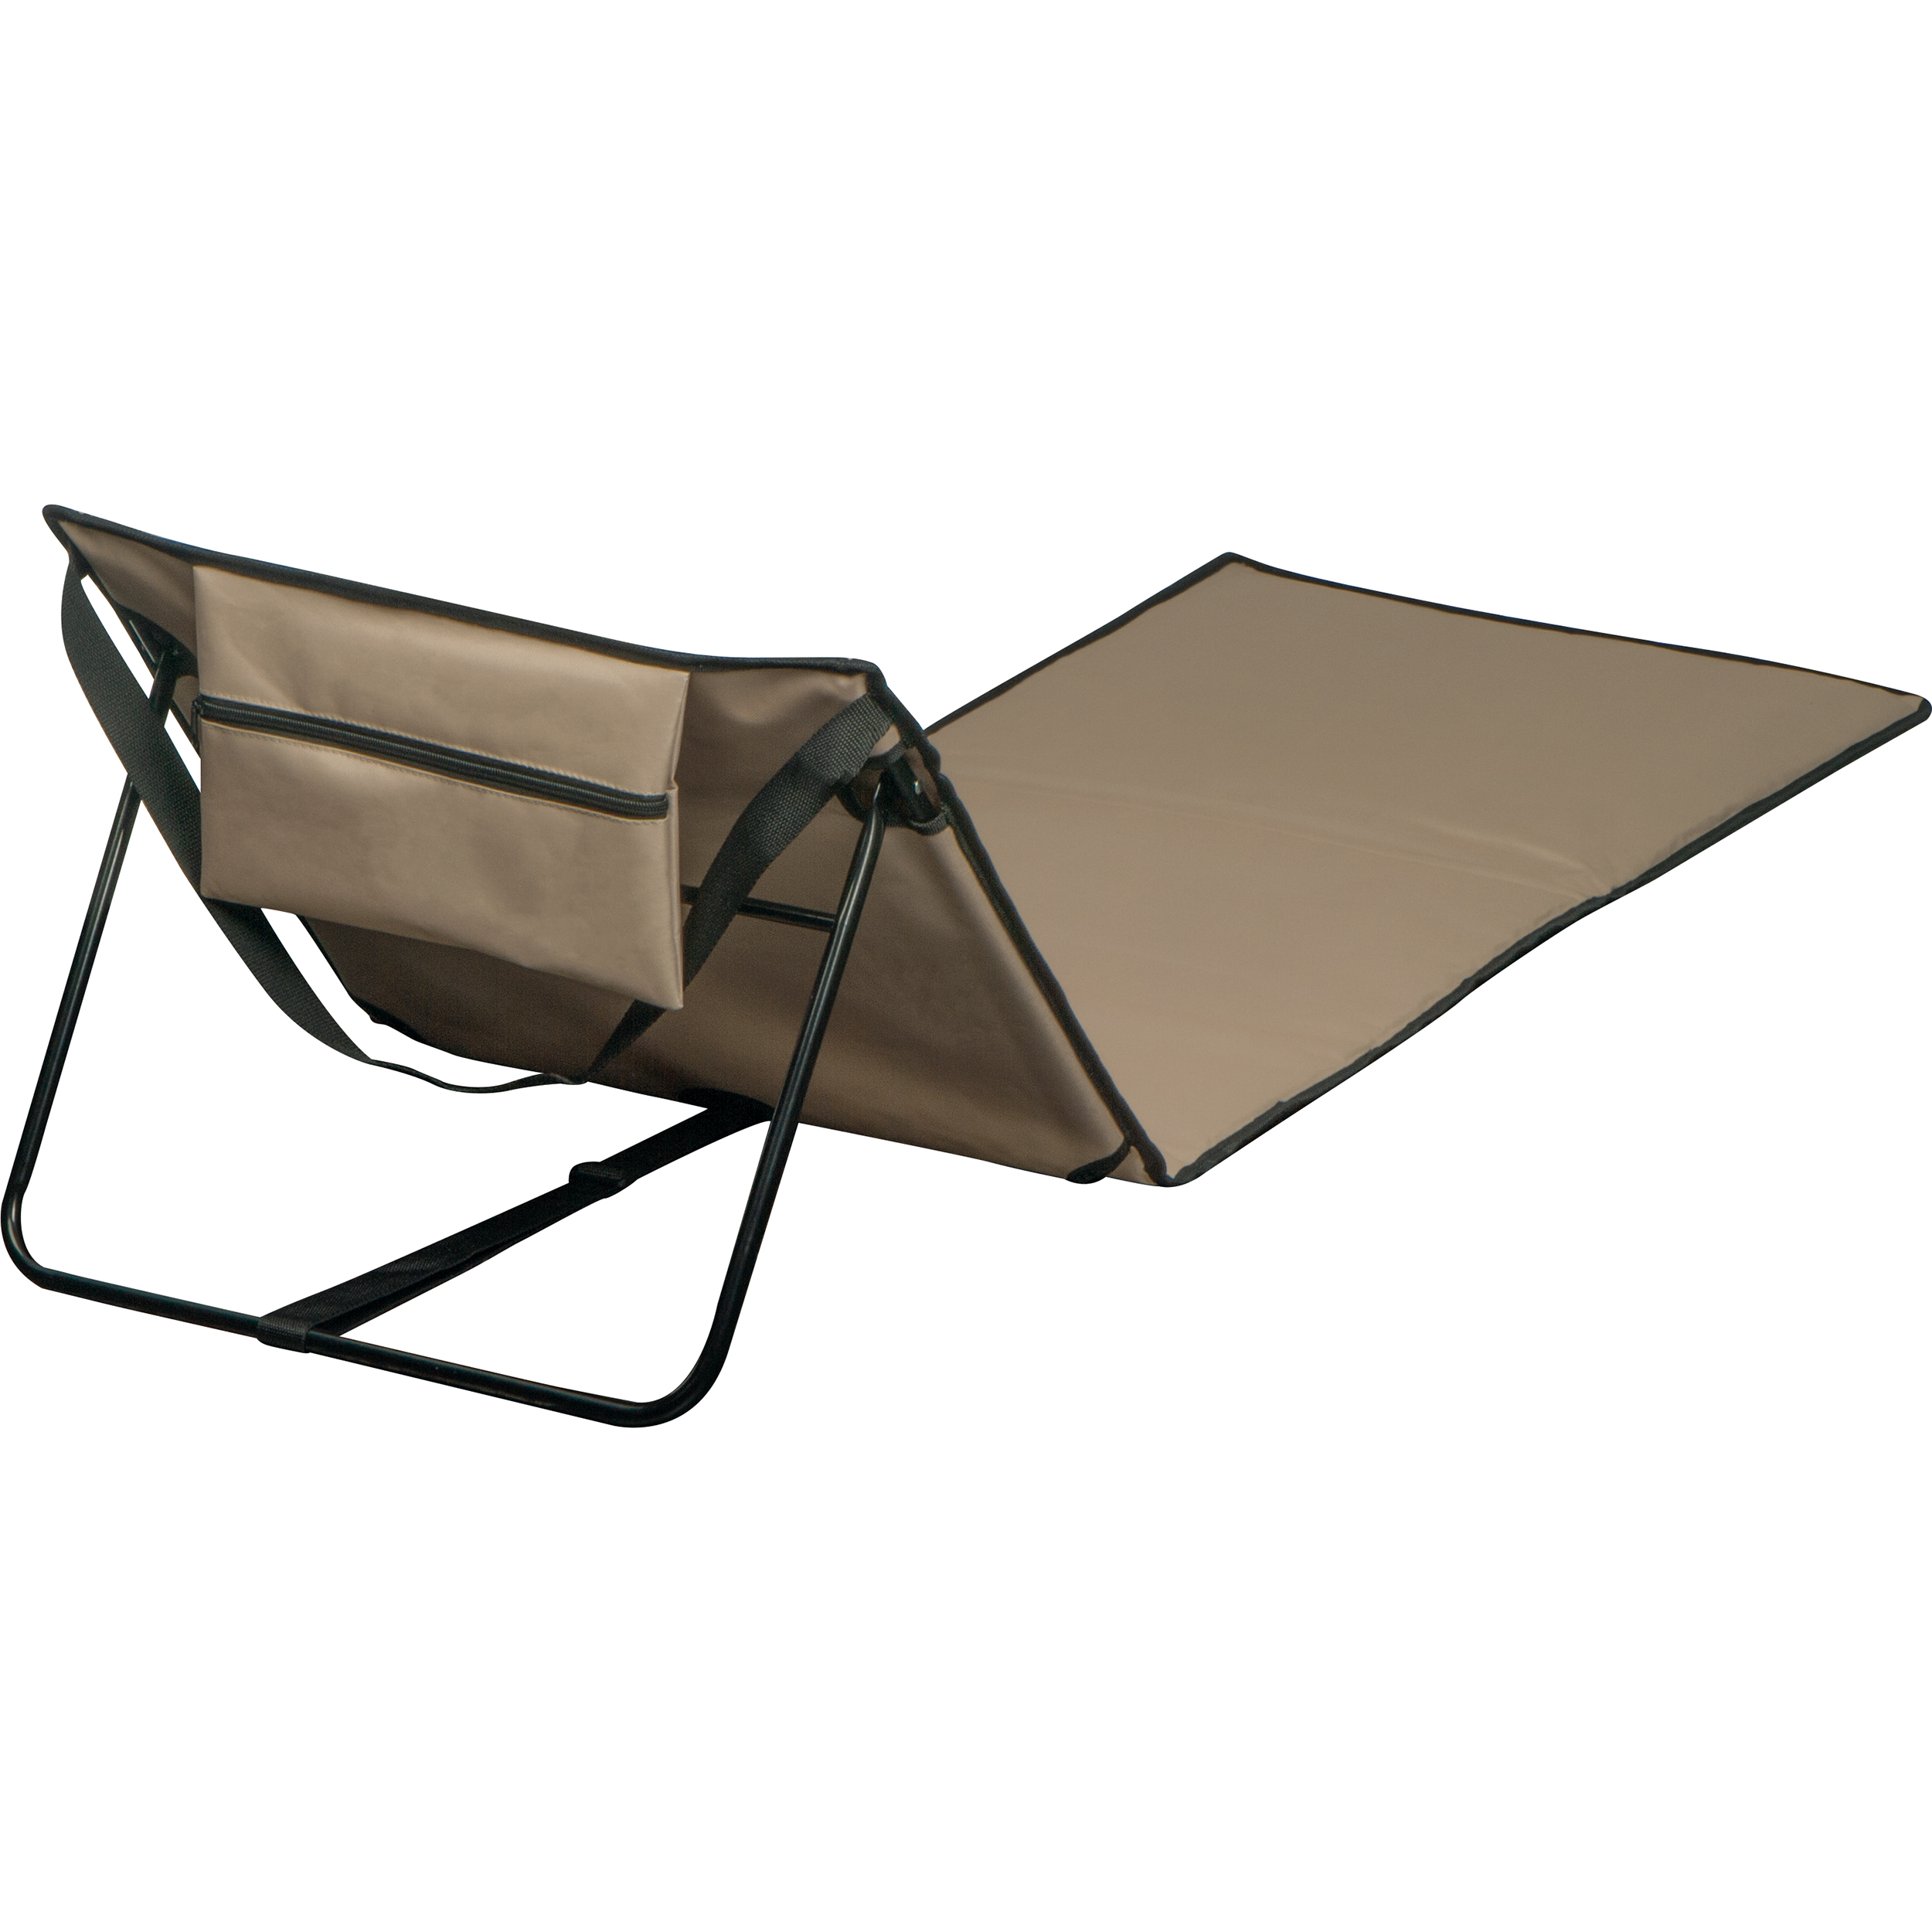 Beachmat with Headrest and Shoulderstraps